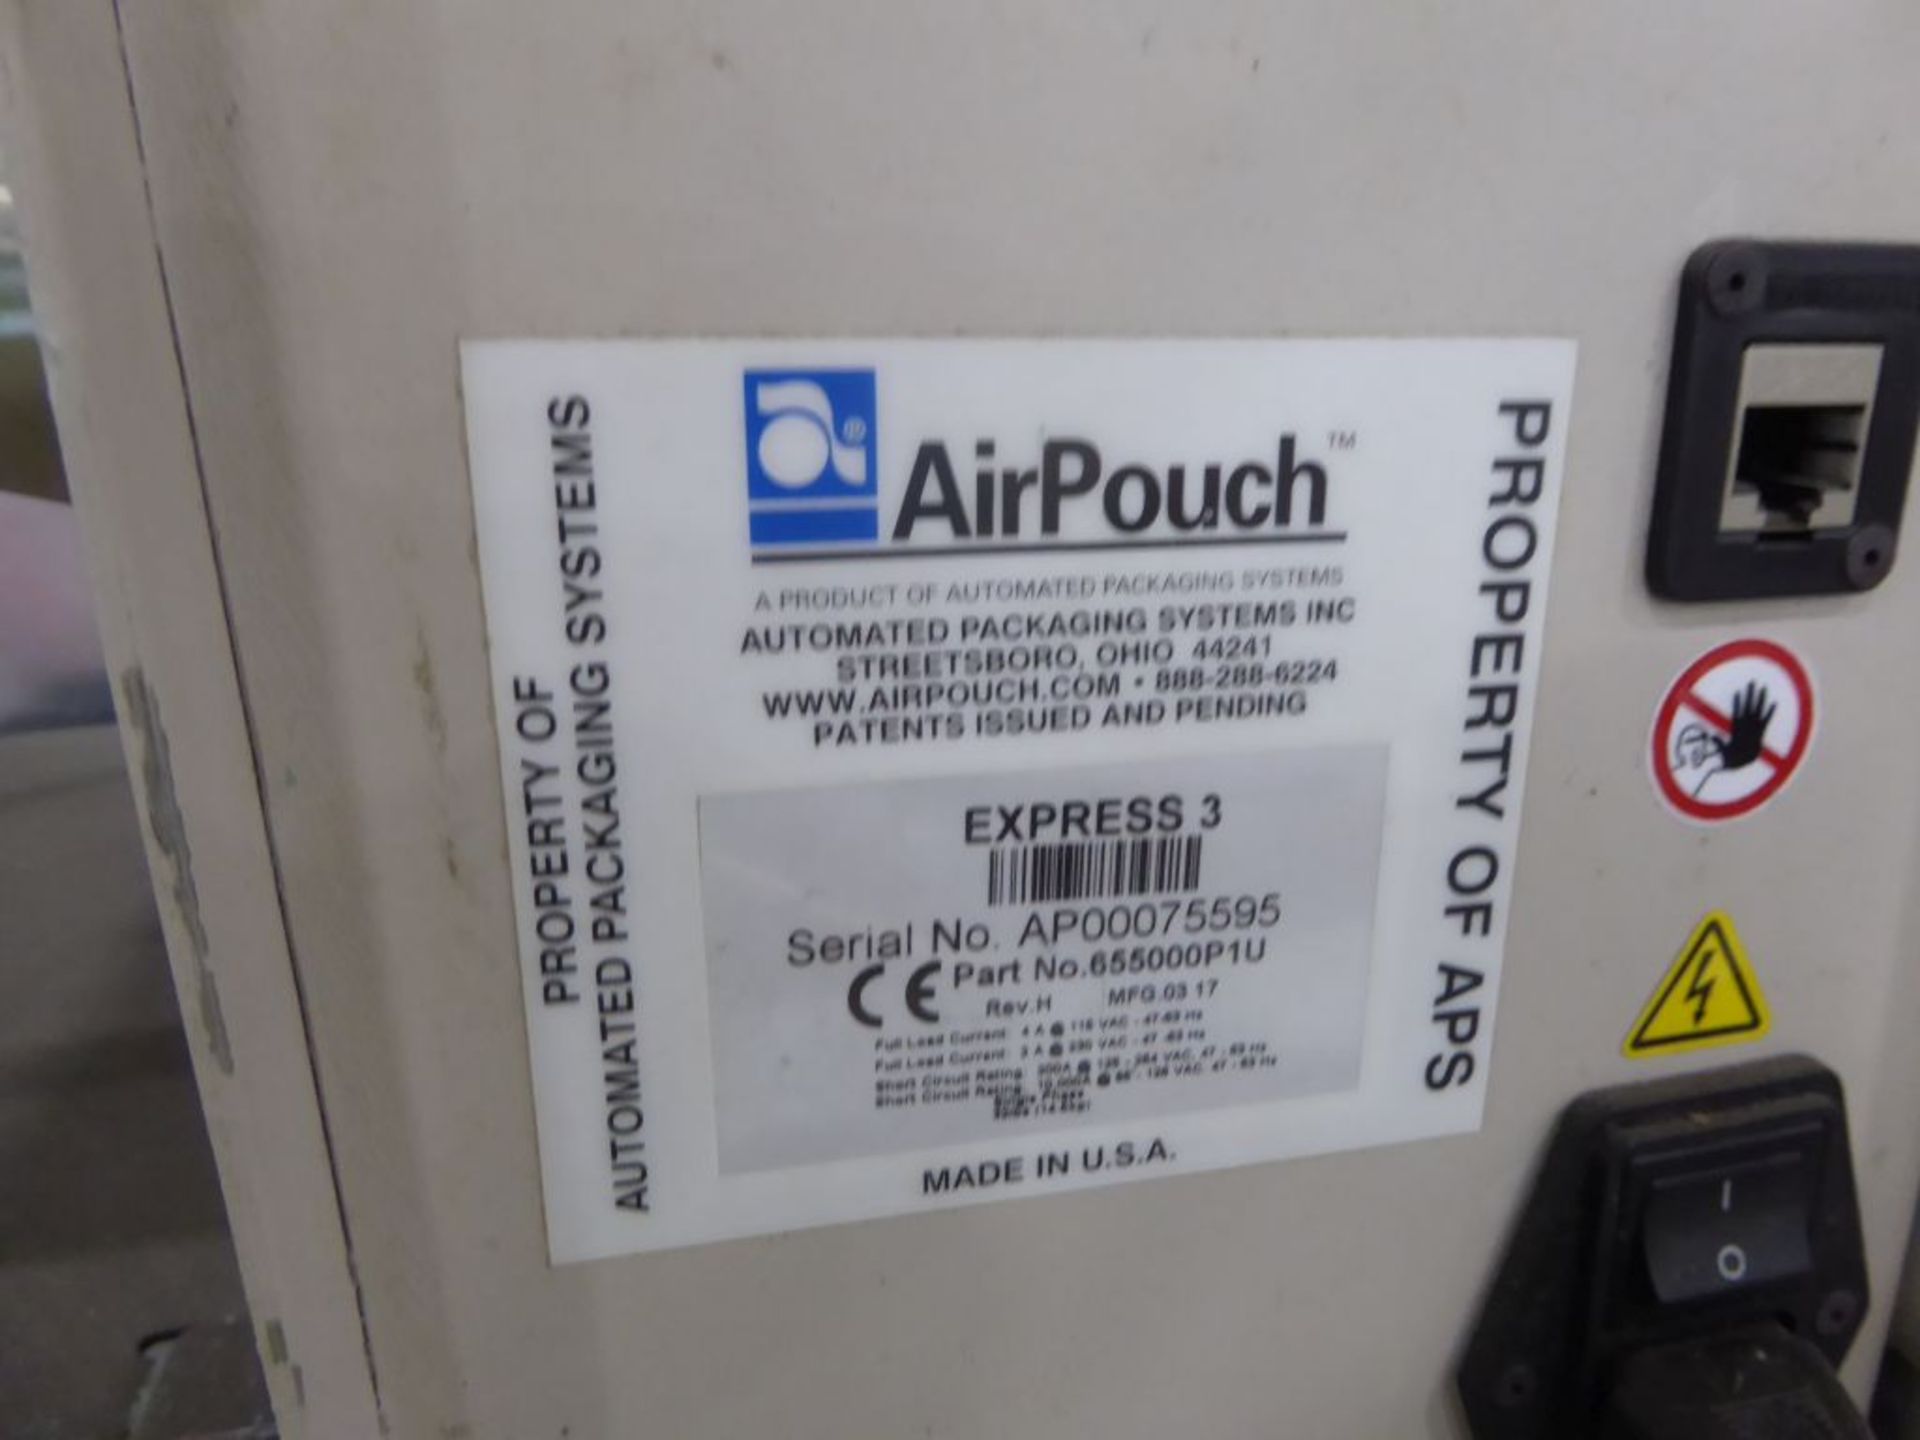 Air Pouch Express 3 Packaging System - Image 4 of 6